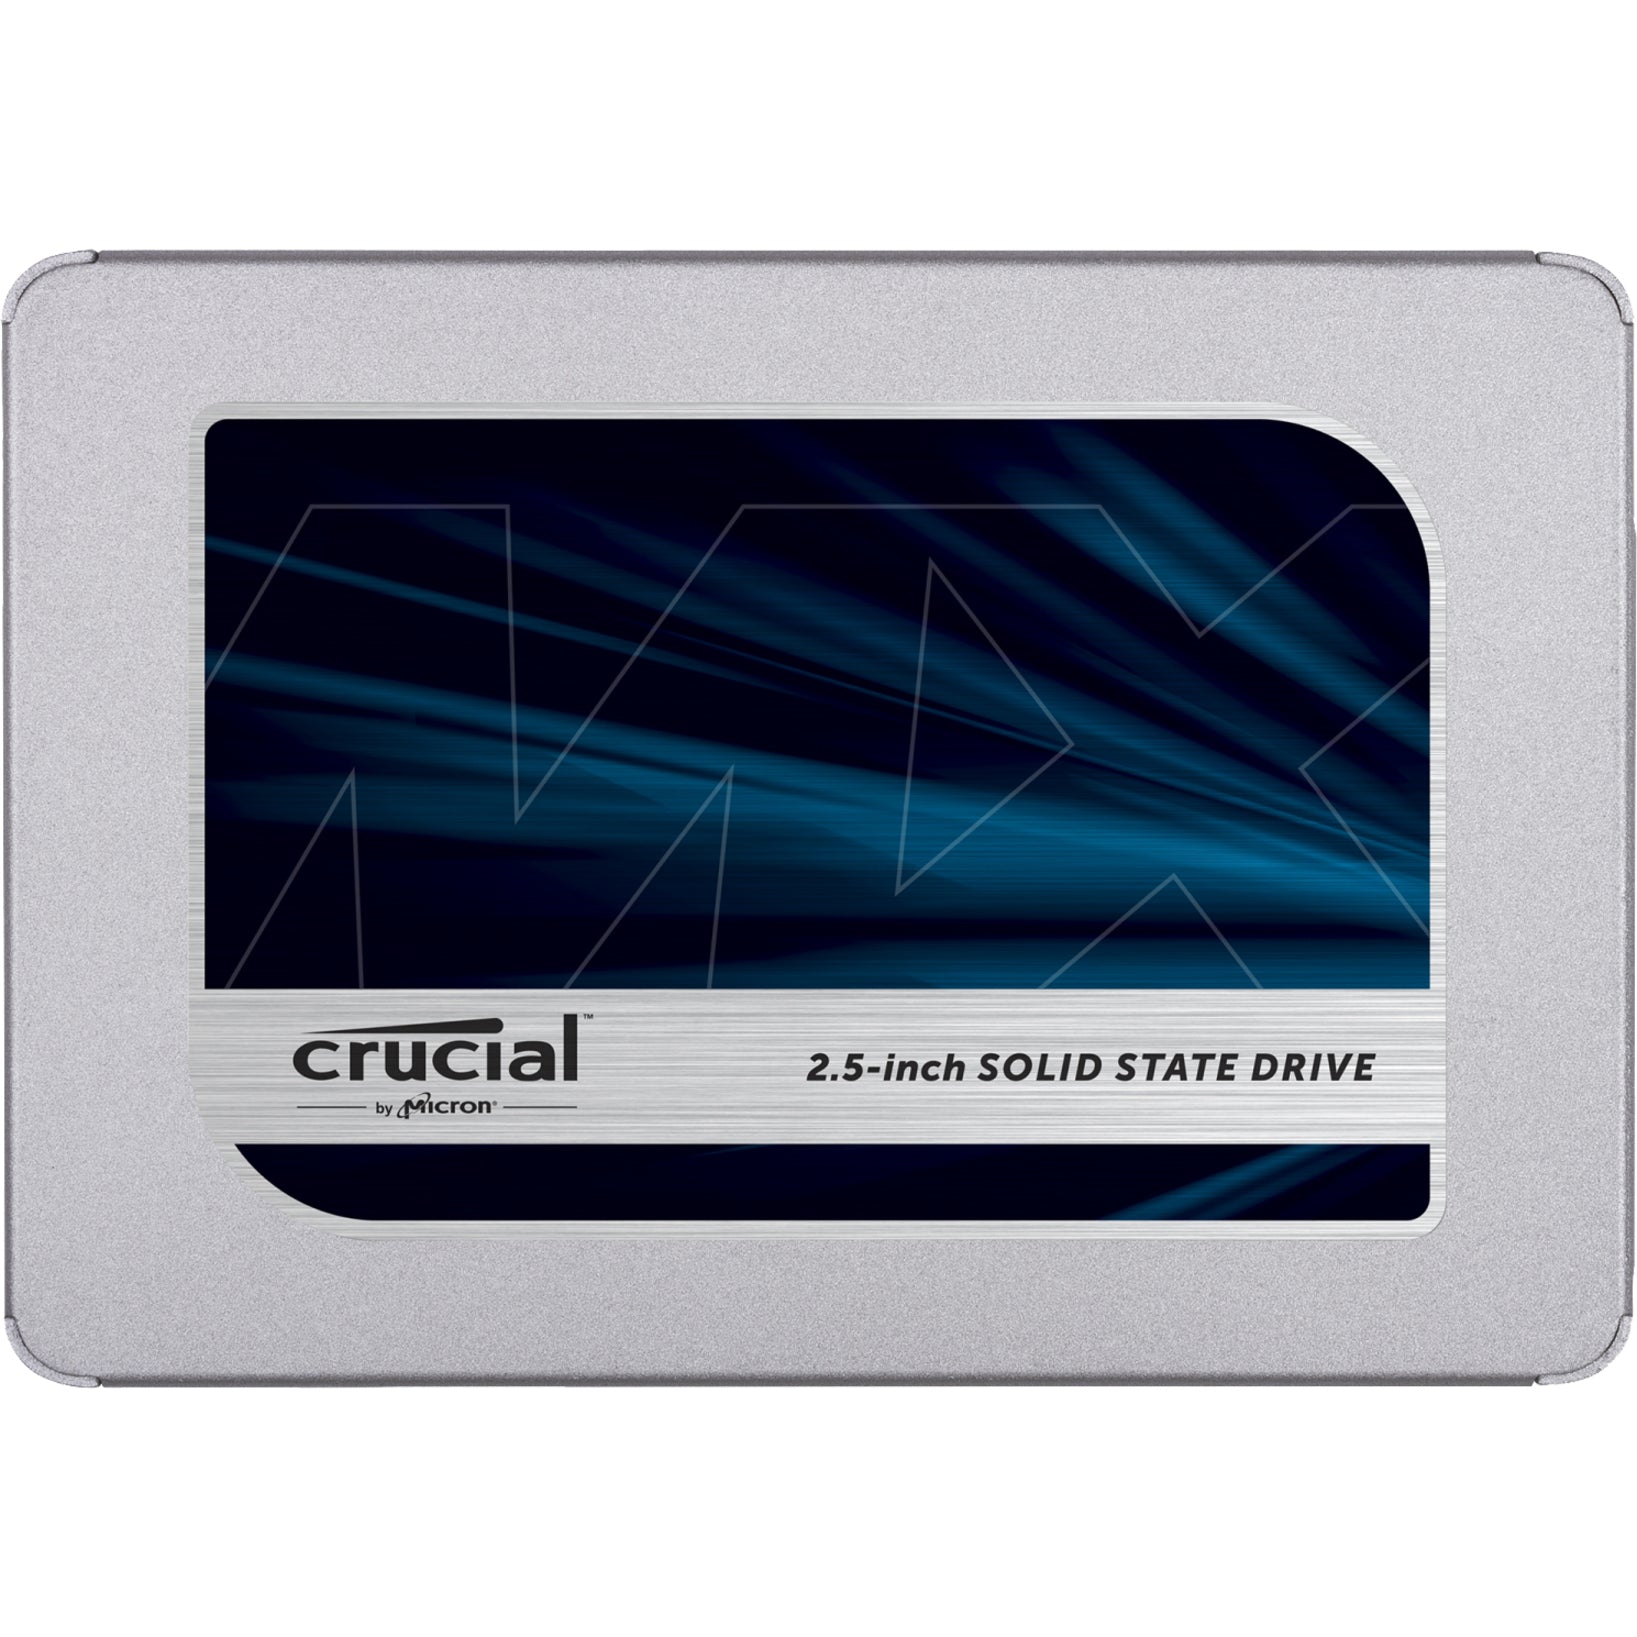 Crucial CT1000MX500SSD1 MX500 2.5-inch Solid State Drive, 1TB Storage Capacity, 5 Year Warranty